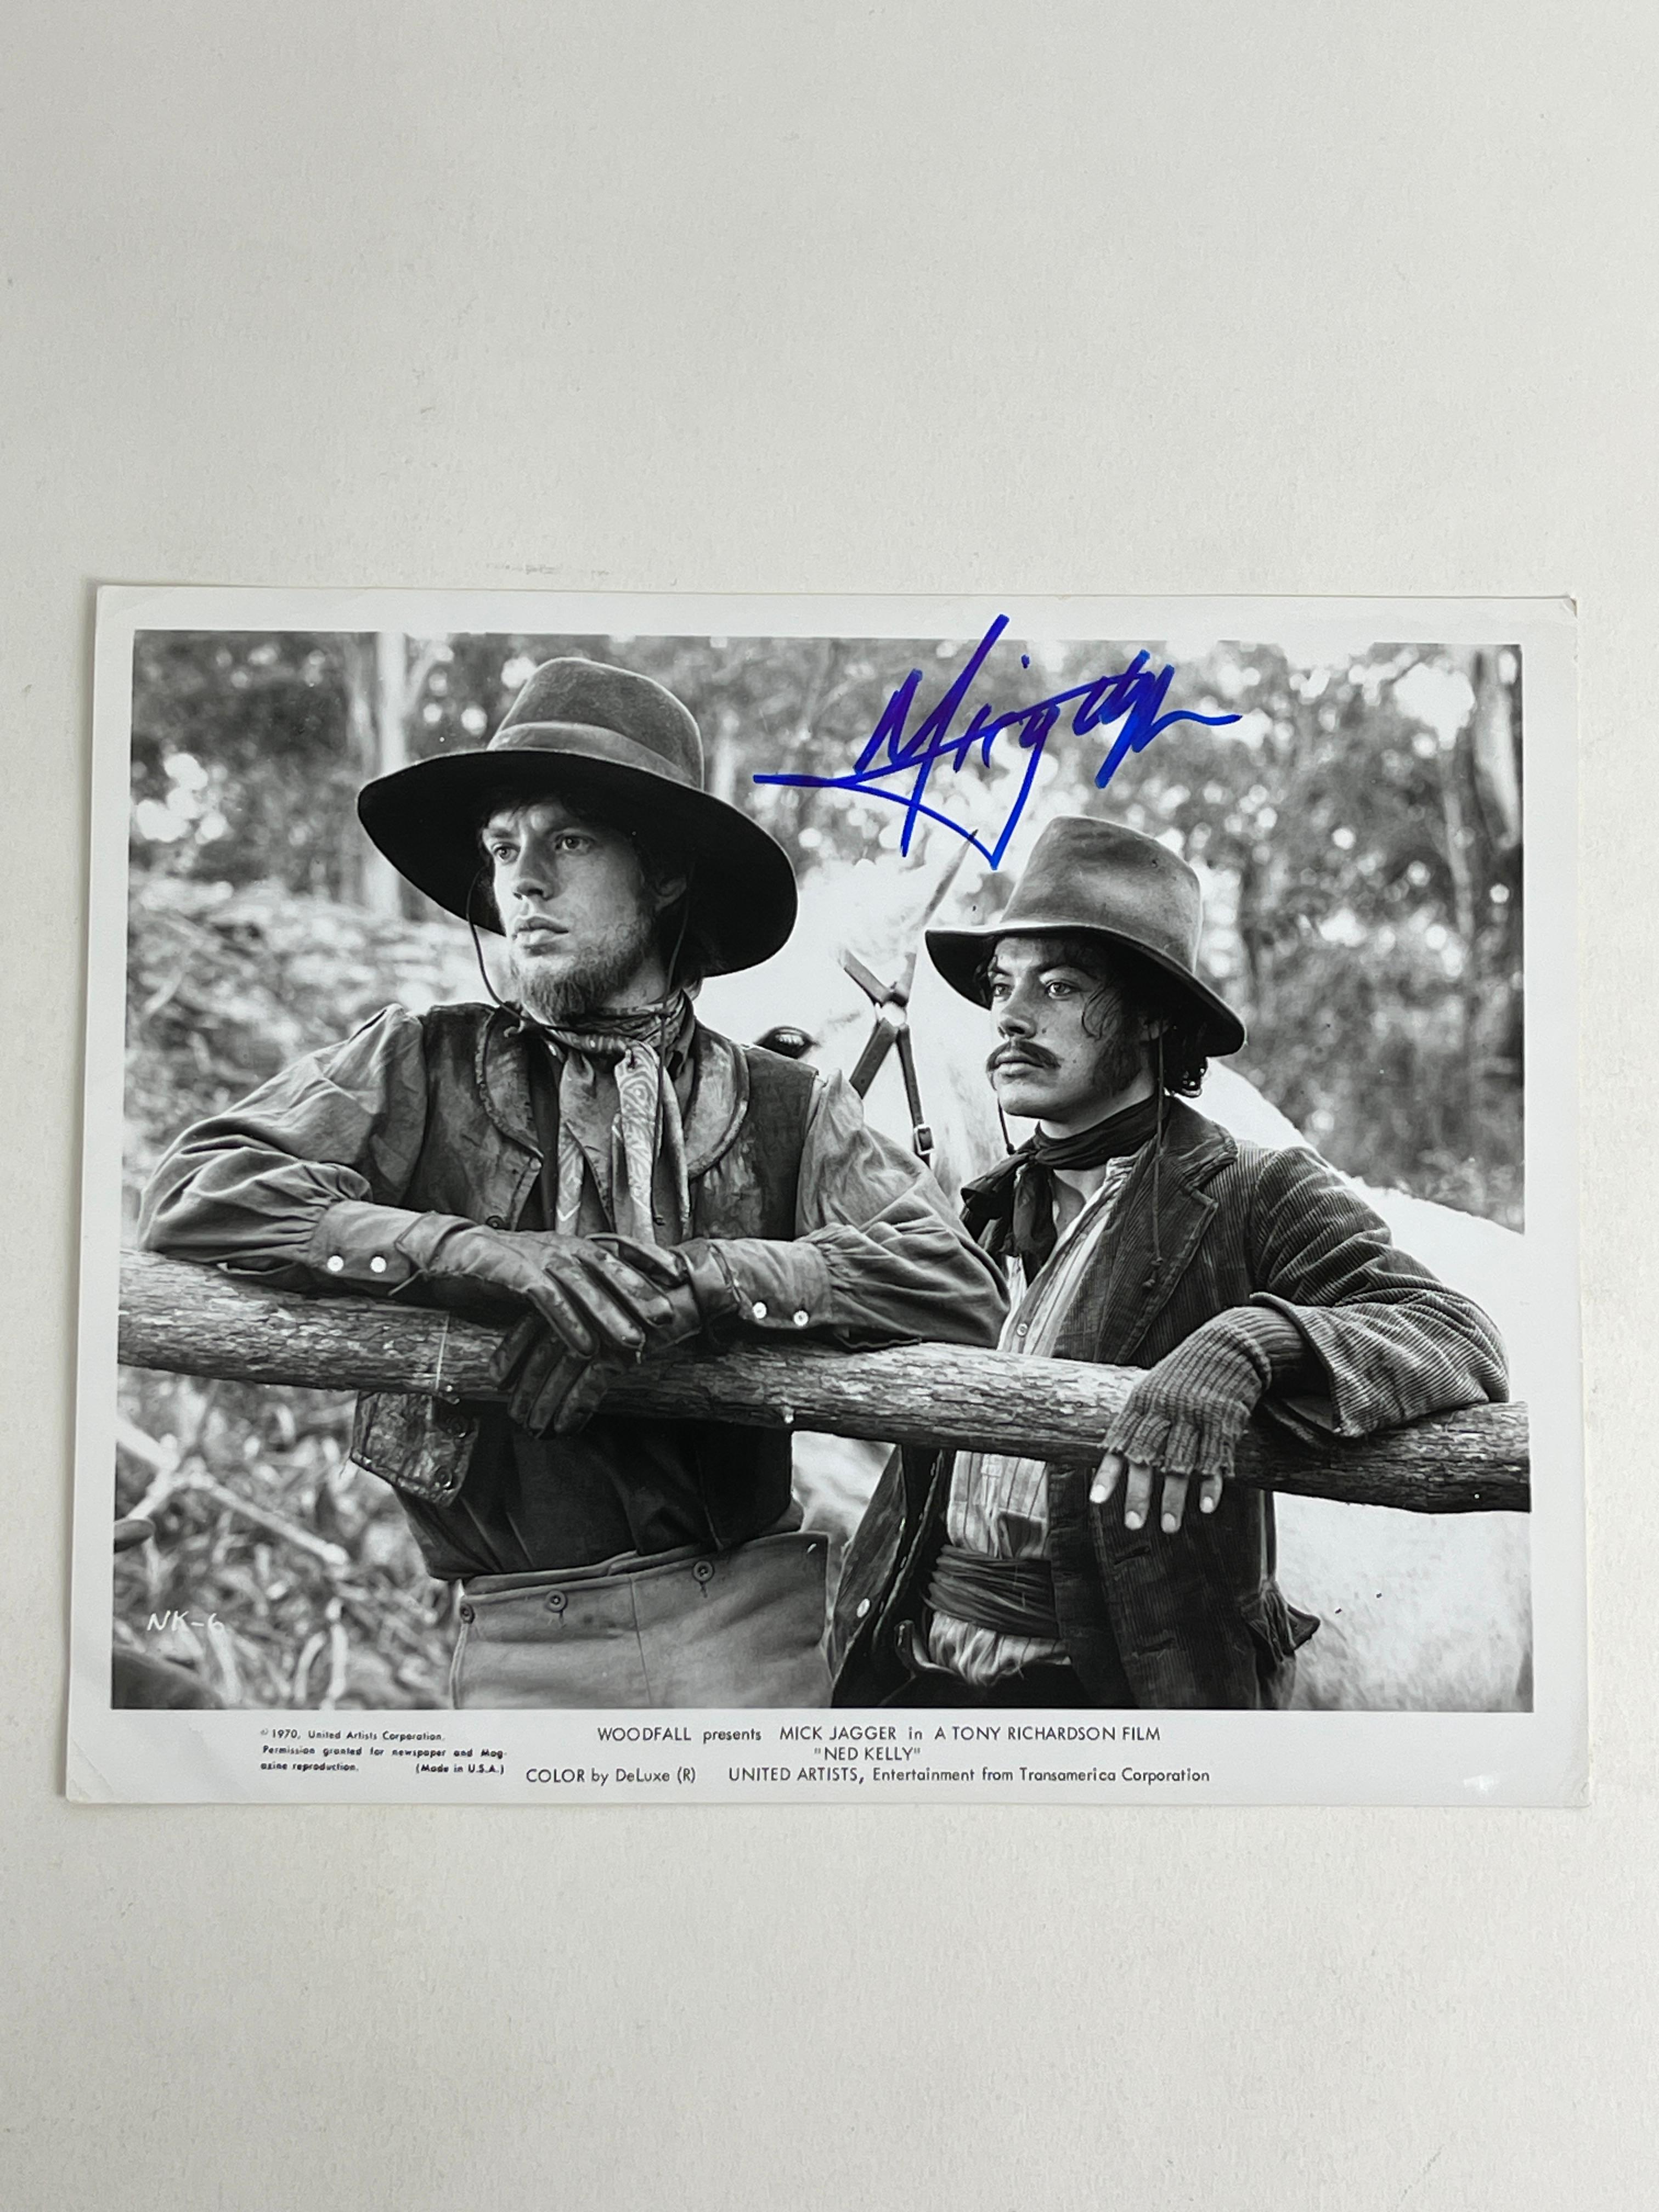 ORIGINAL BLACK AND WHITE PHOTOGRAPHY MICK JAGGER SIGNED ROLLING STONES MOVIE NED KELLY